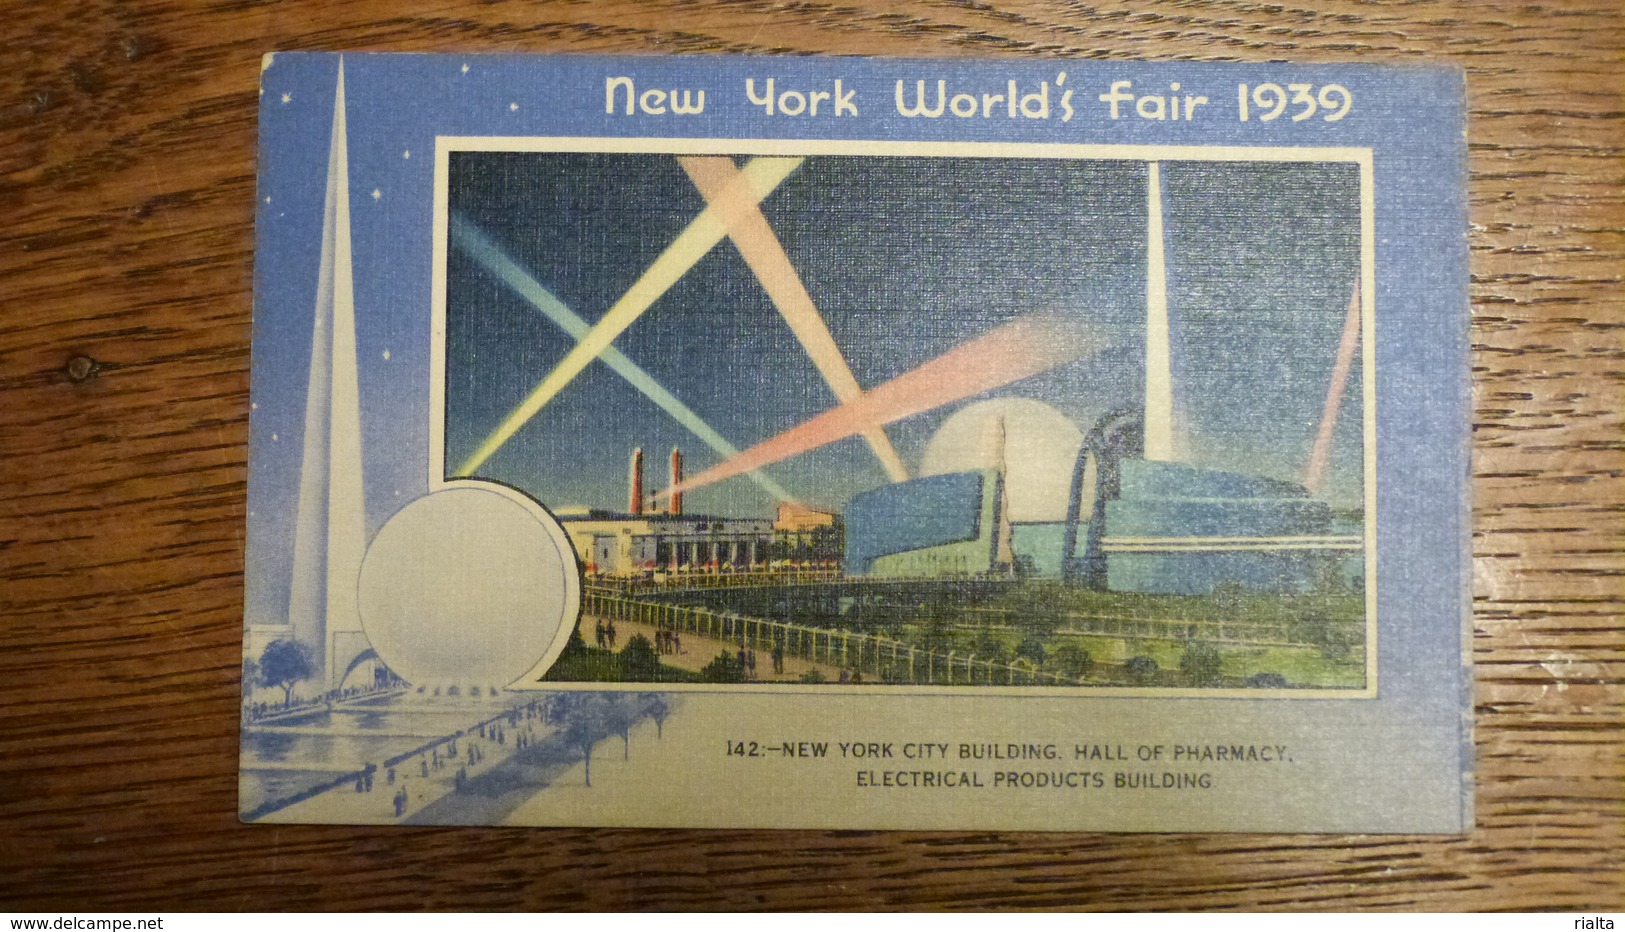 ETATS-UNIS, NEW YORK WORLD'S FAIR 1939, NEW YORK CITY BUILDING, HALL OF PHARMACY ELECTRICAL PRODUCTS BUILDING - Exhibitions